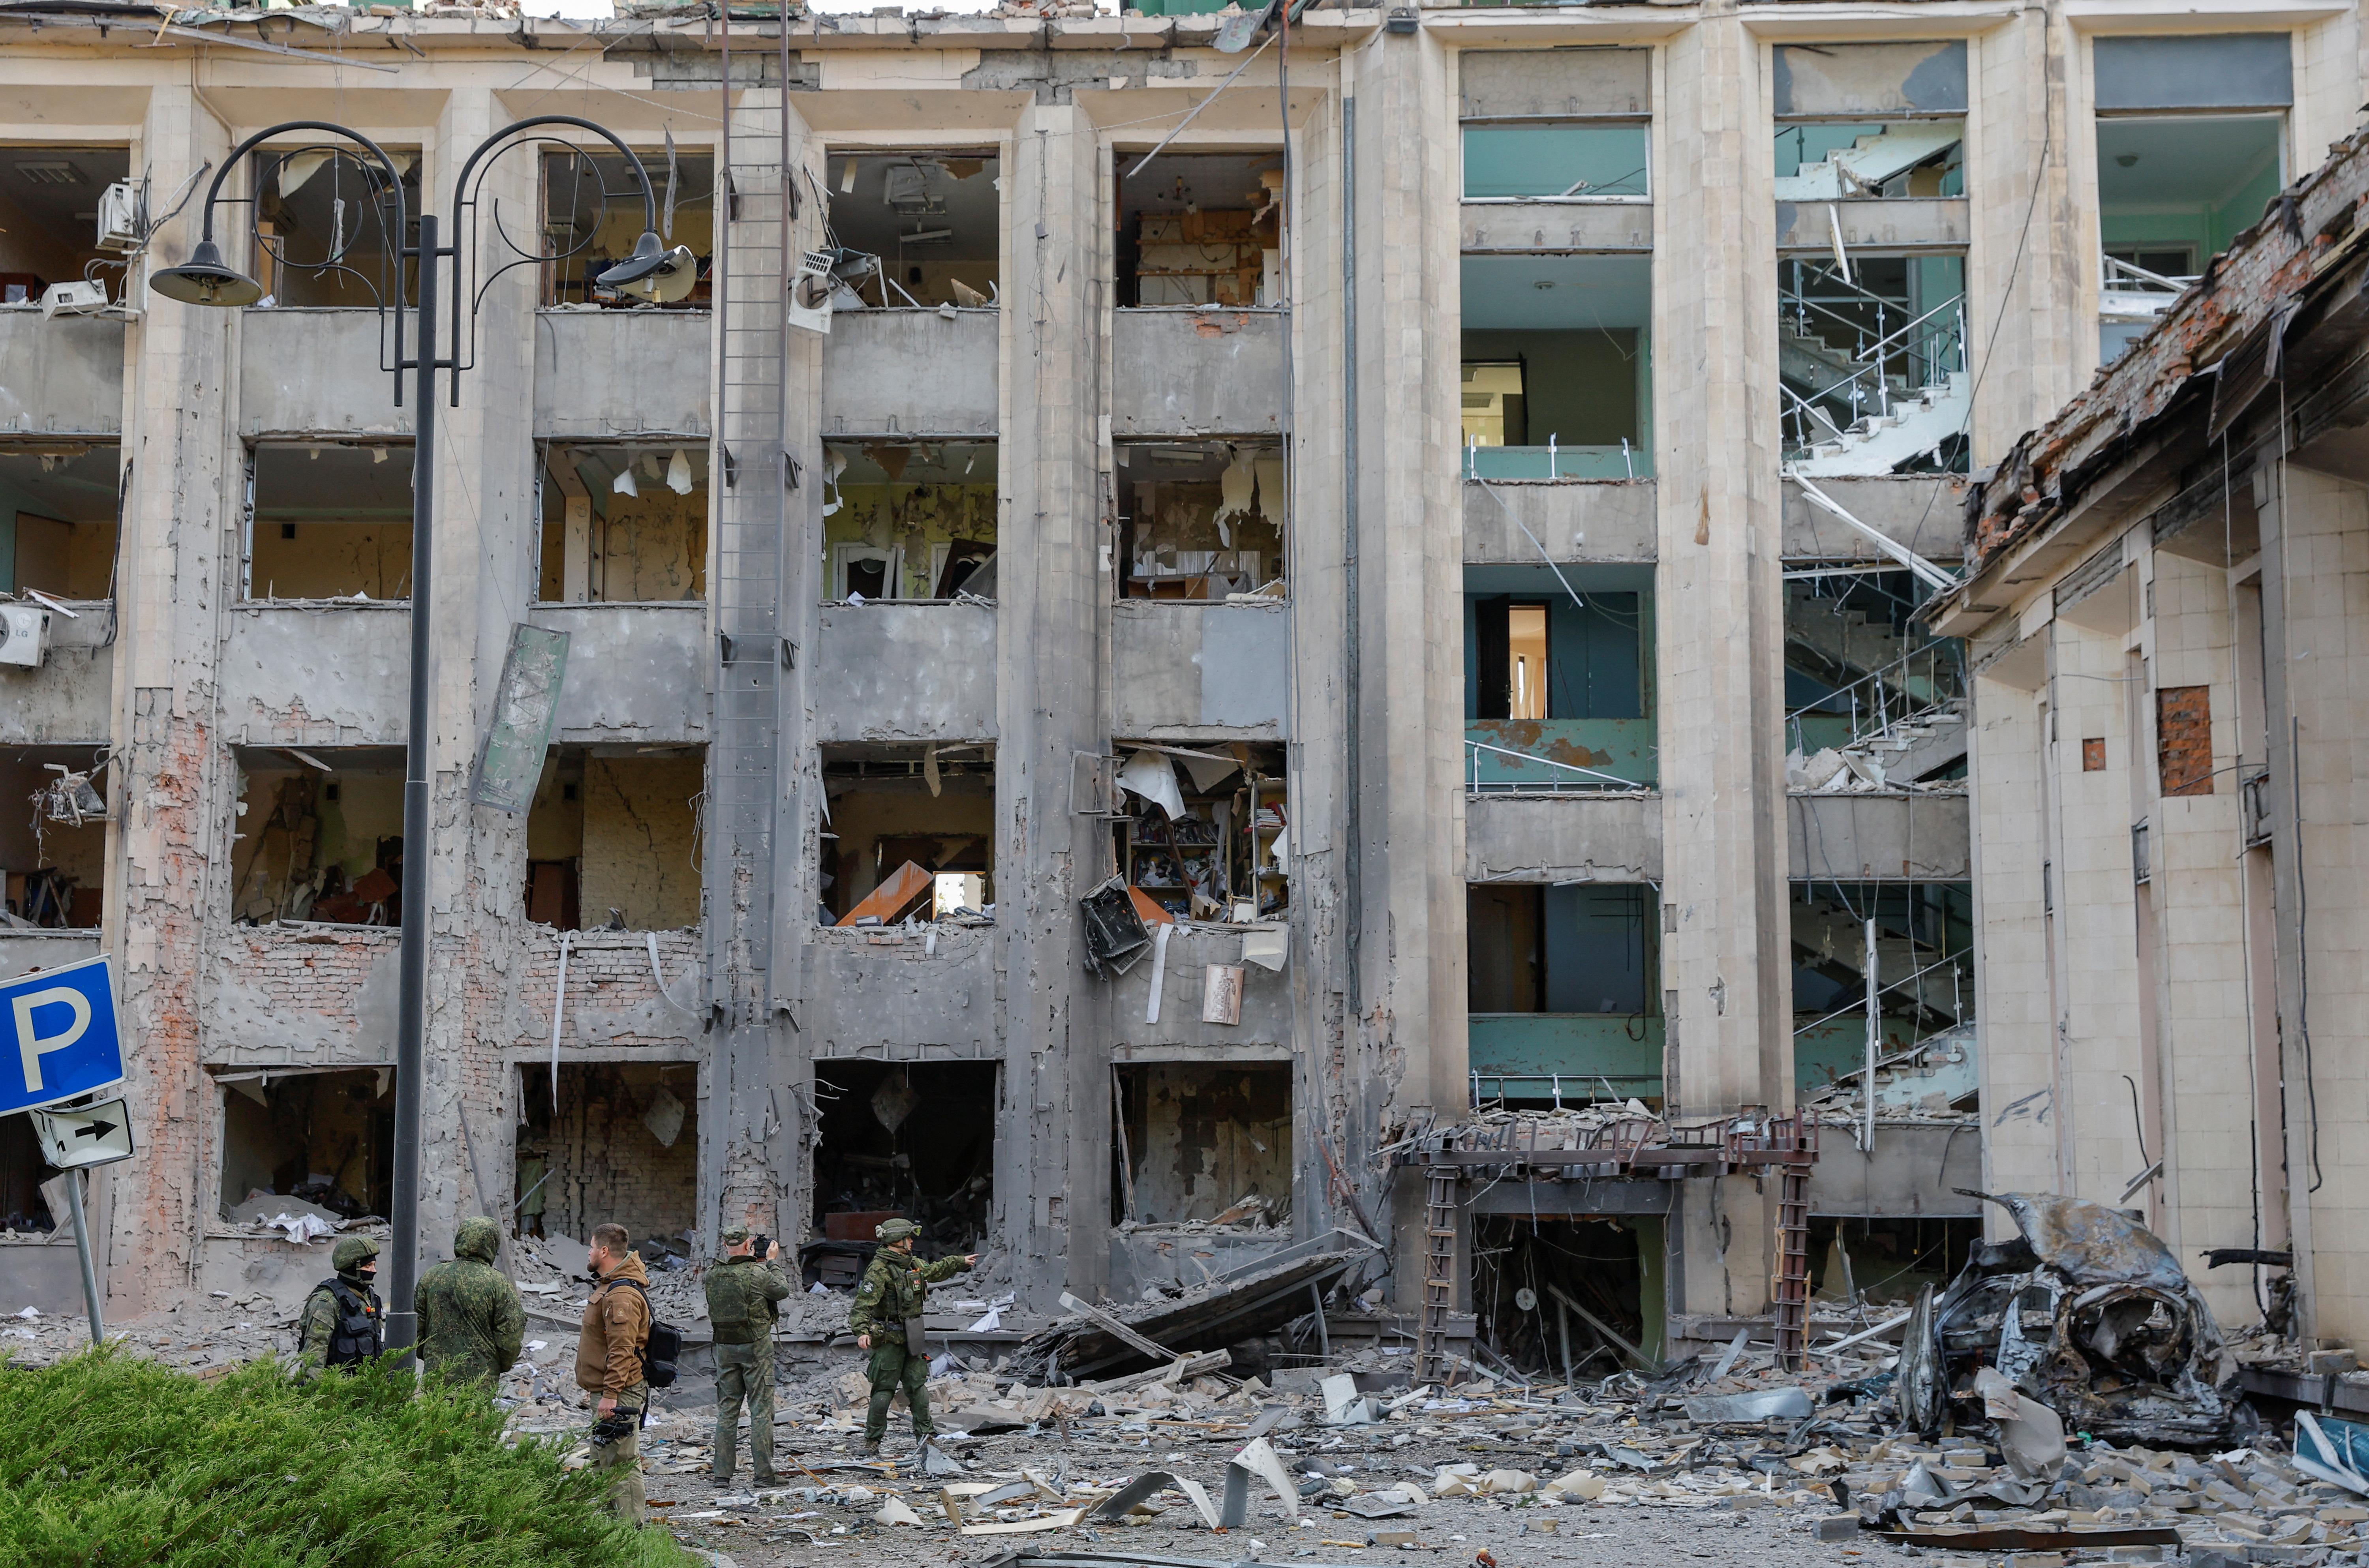 Donetsk city administration hit by shelling